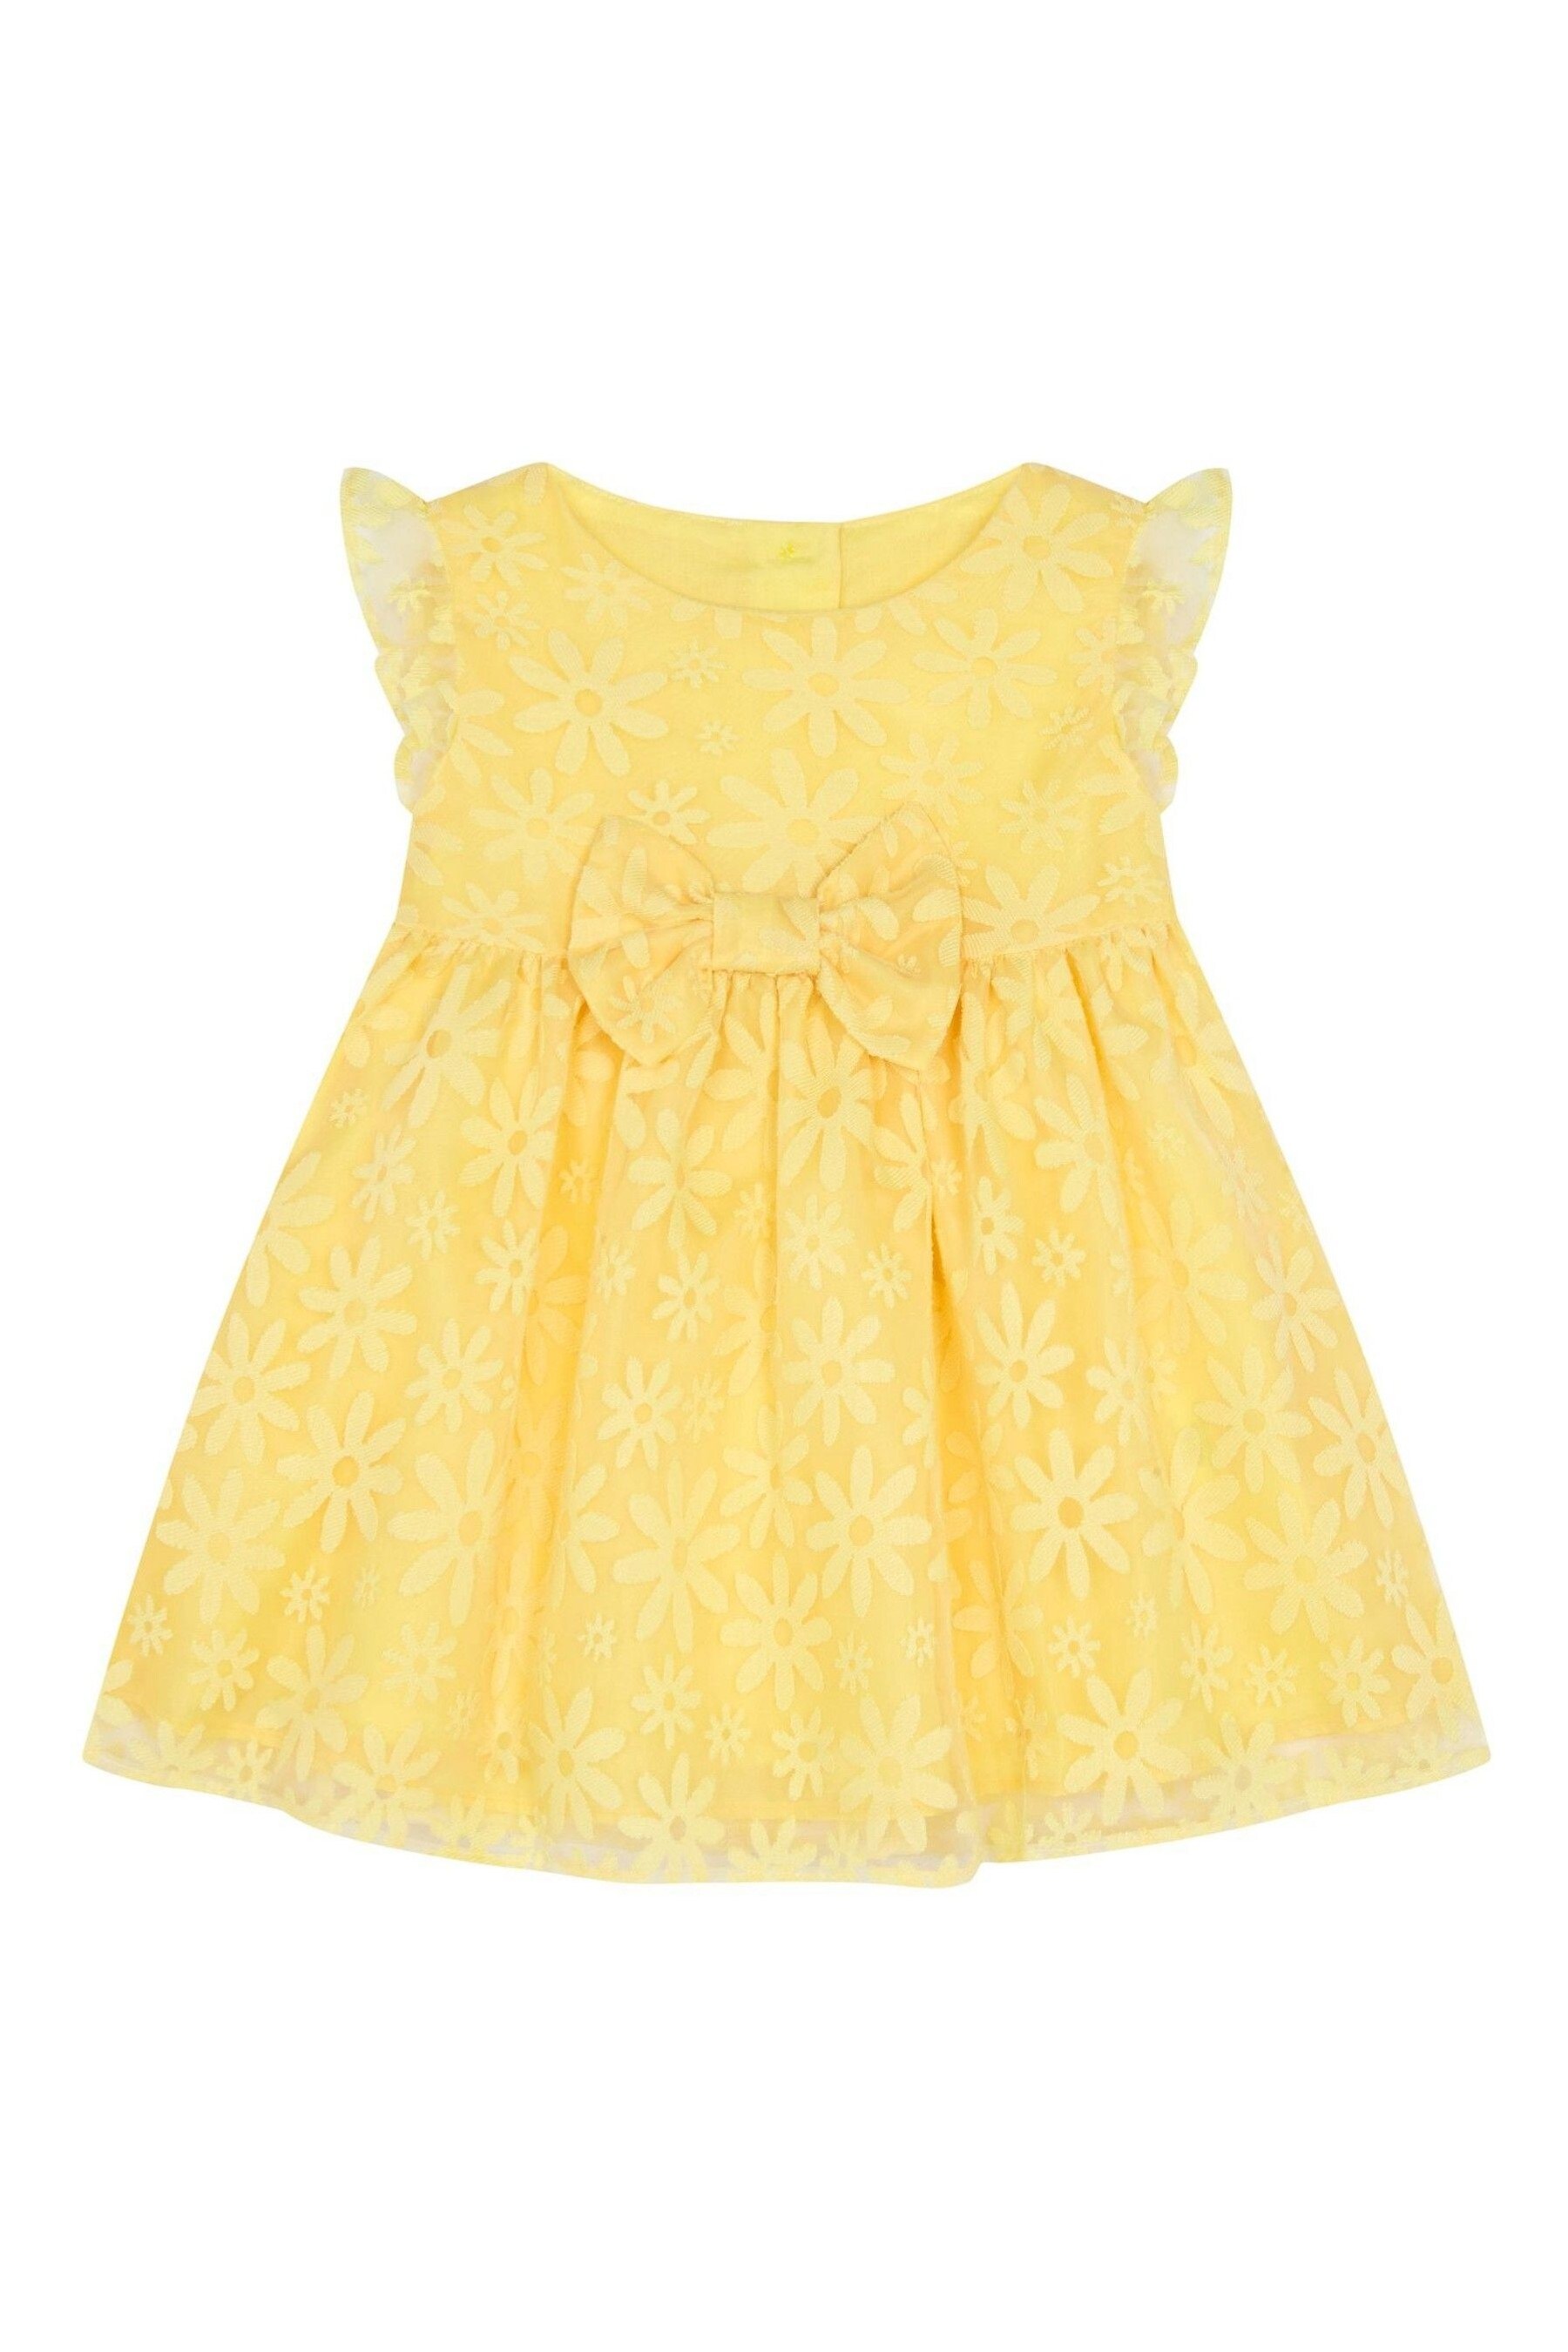 Buy F&F Yellow Occasion Dress from the Next UK online shop